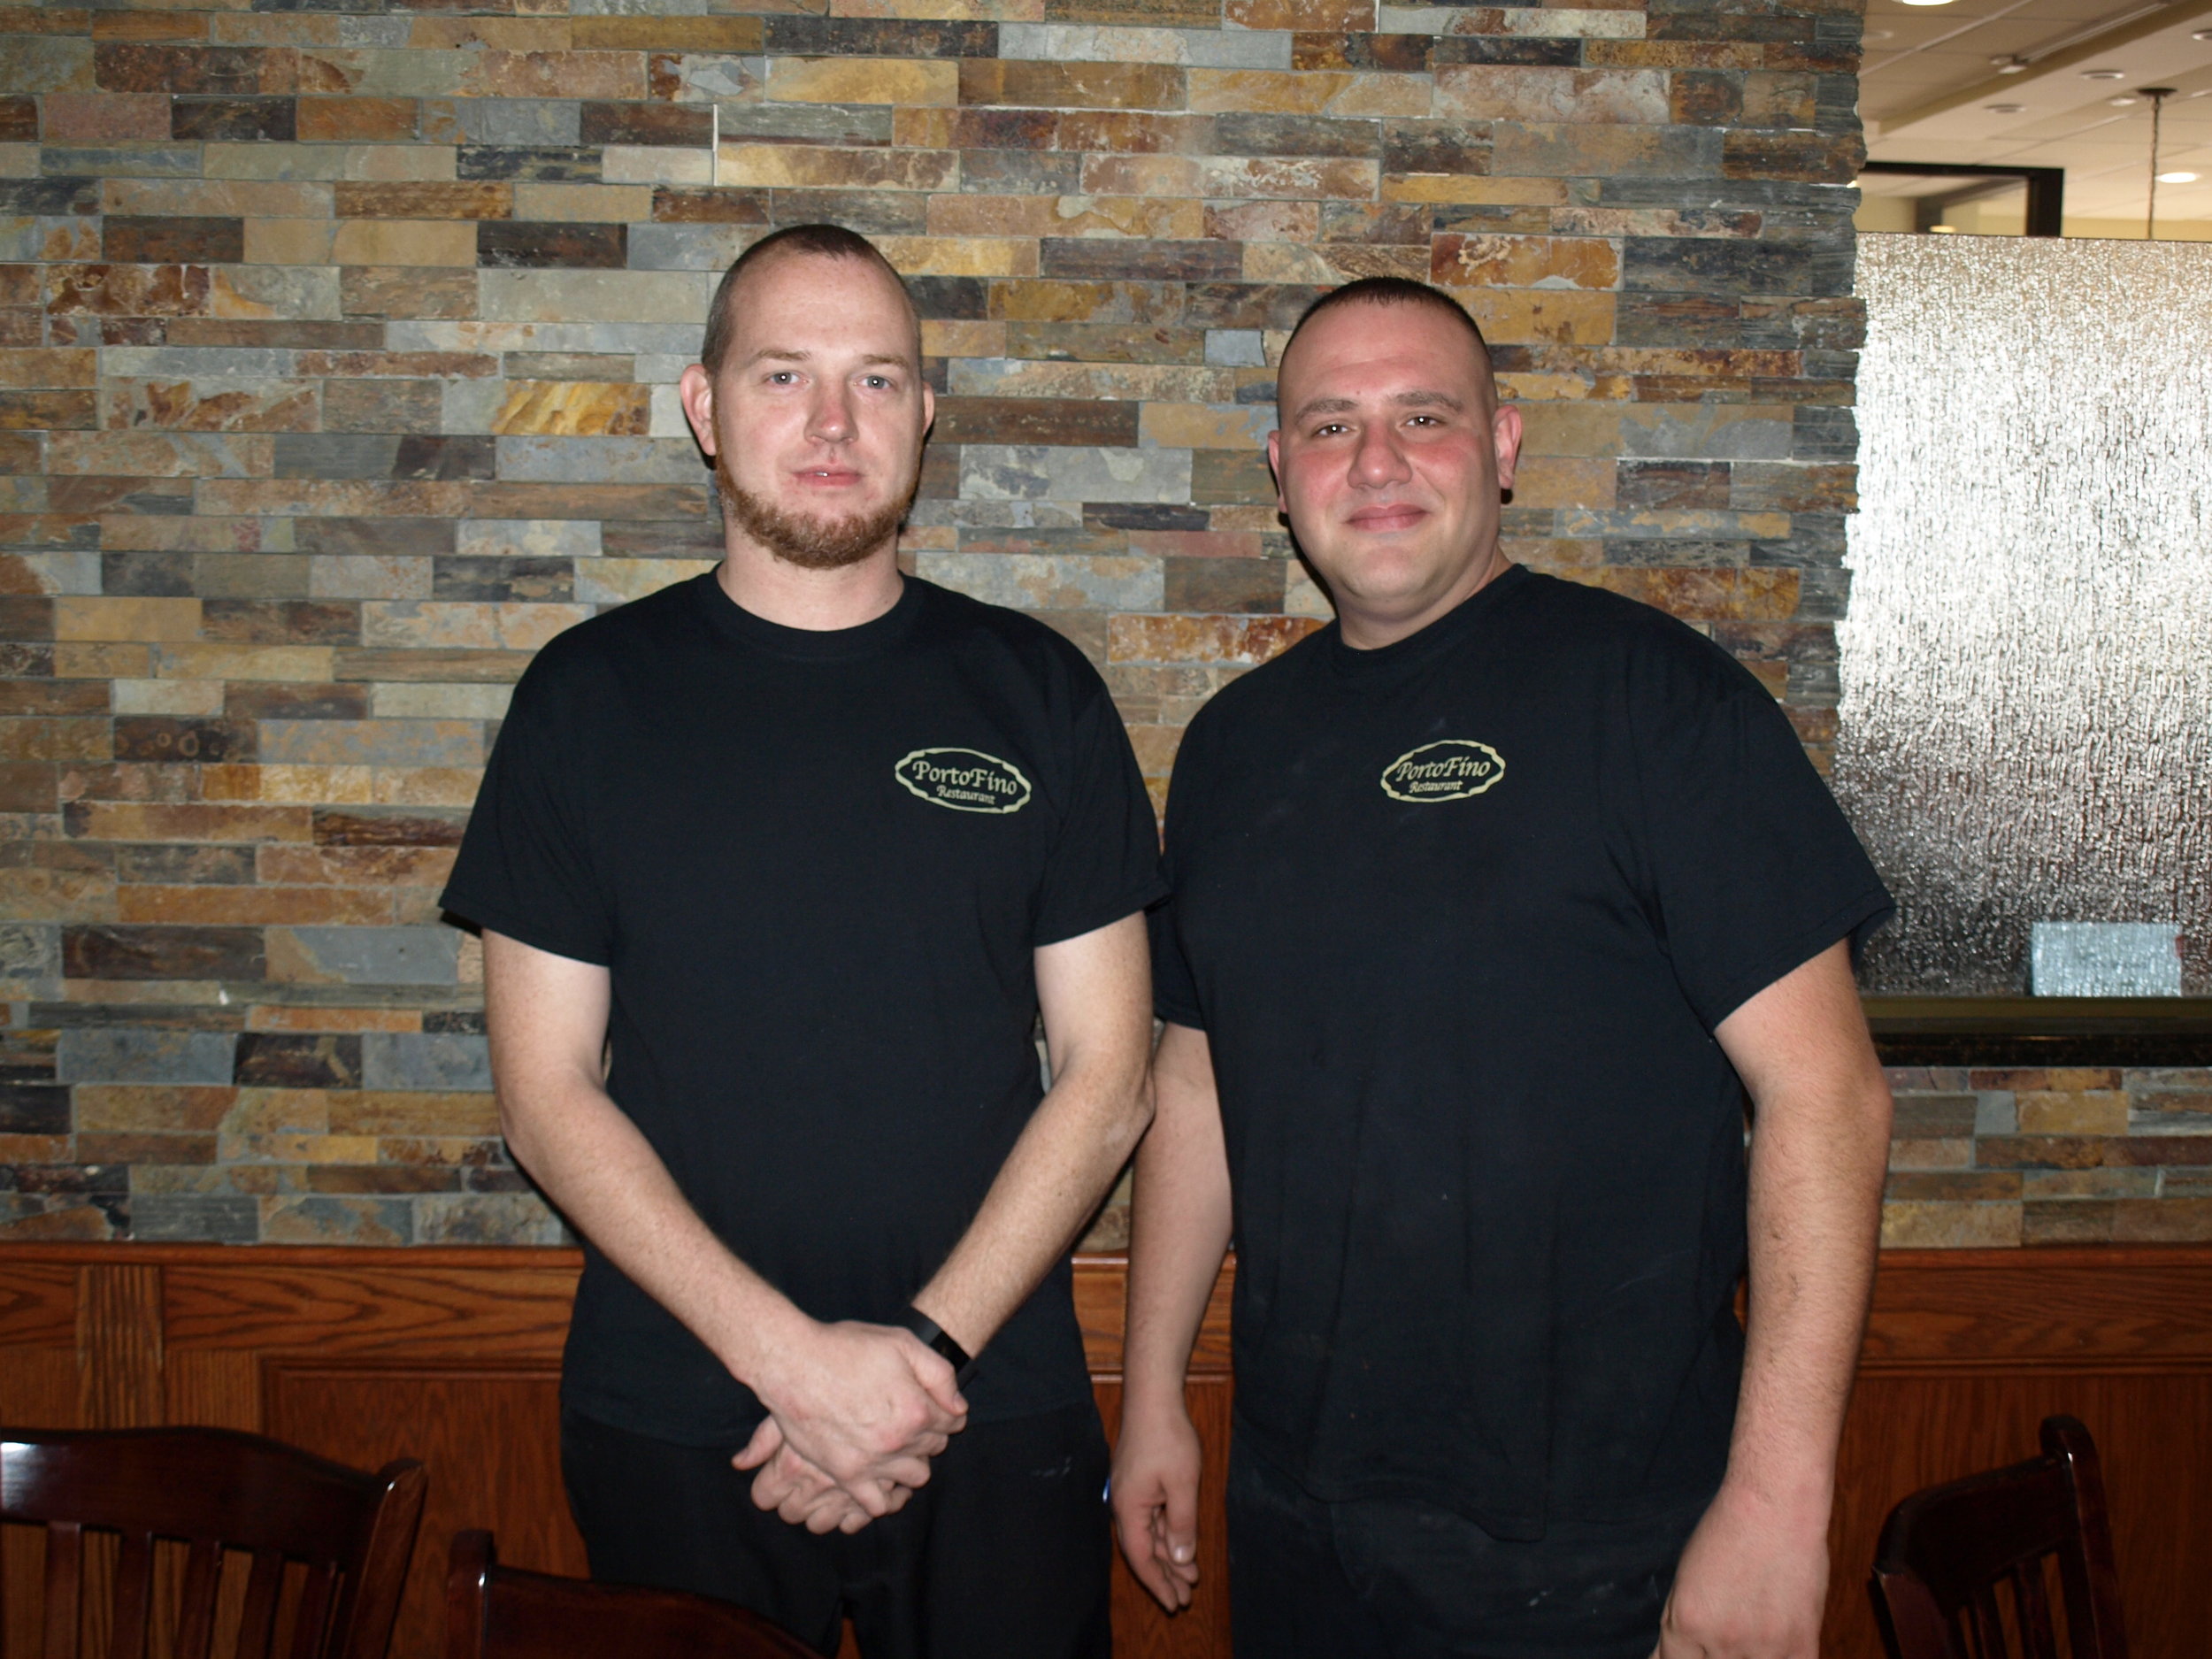   Porto Fino owner Gianni Vigliotti, right, and his first employee Tim Grill have been serving up Italian favorites in Huntington since 2012.   Long Islander News Photo/Connor Beach  